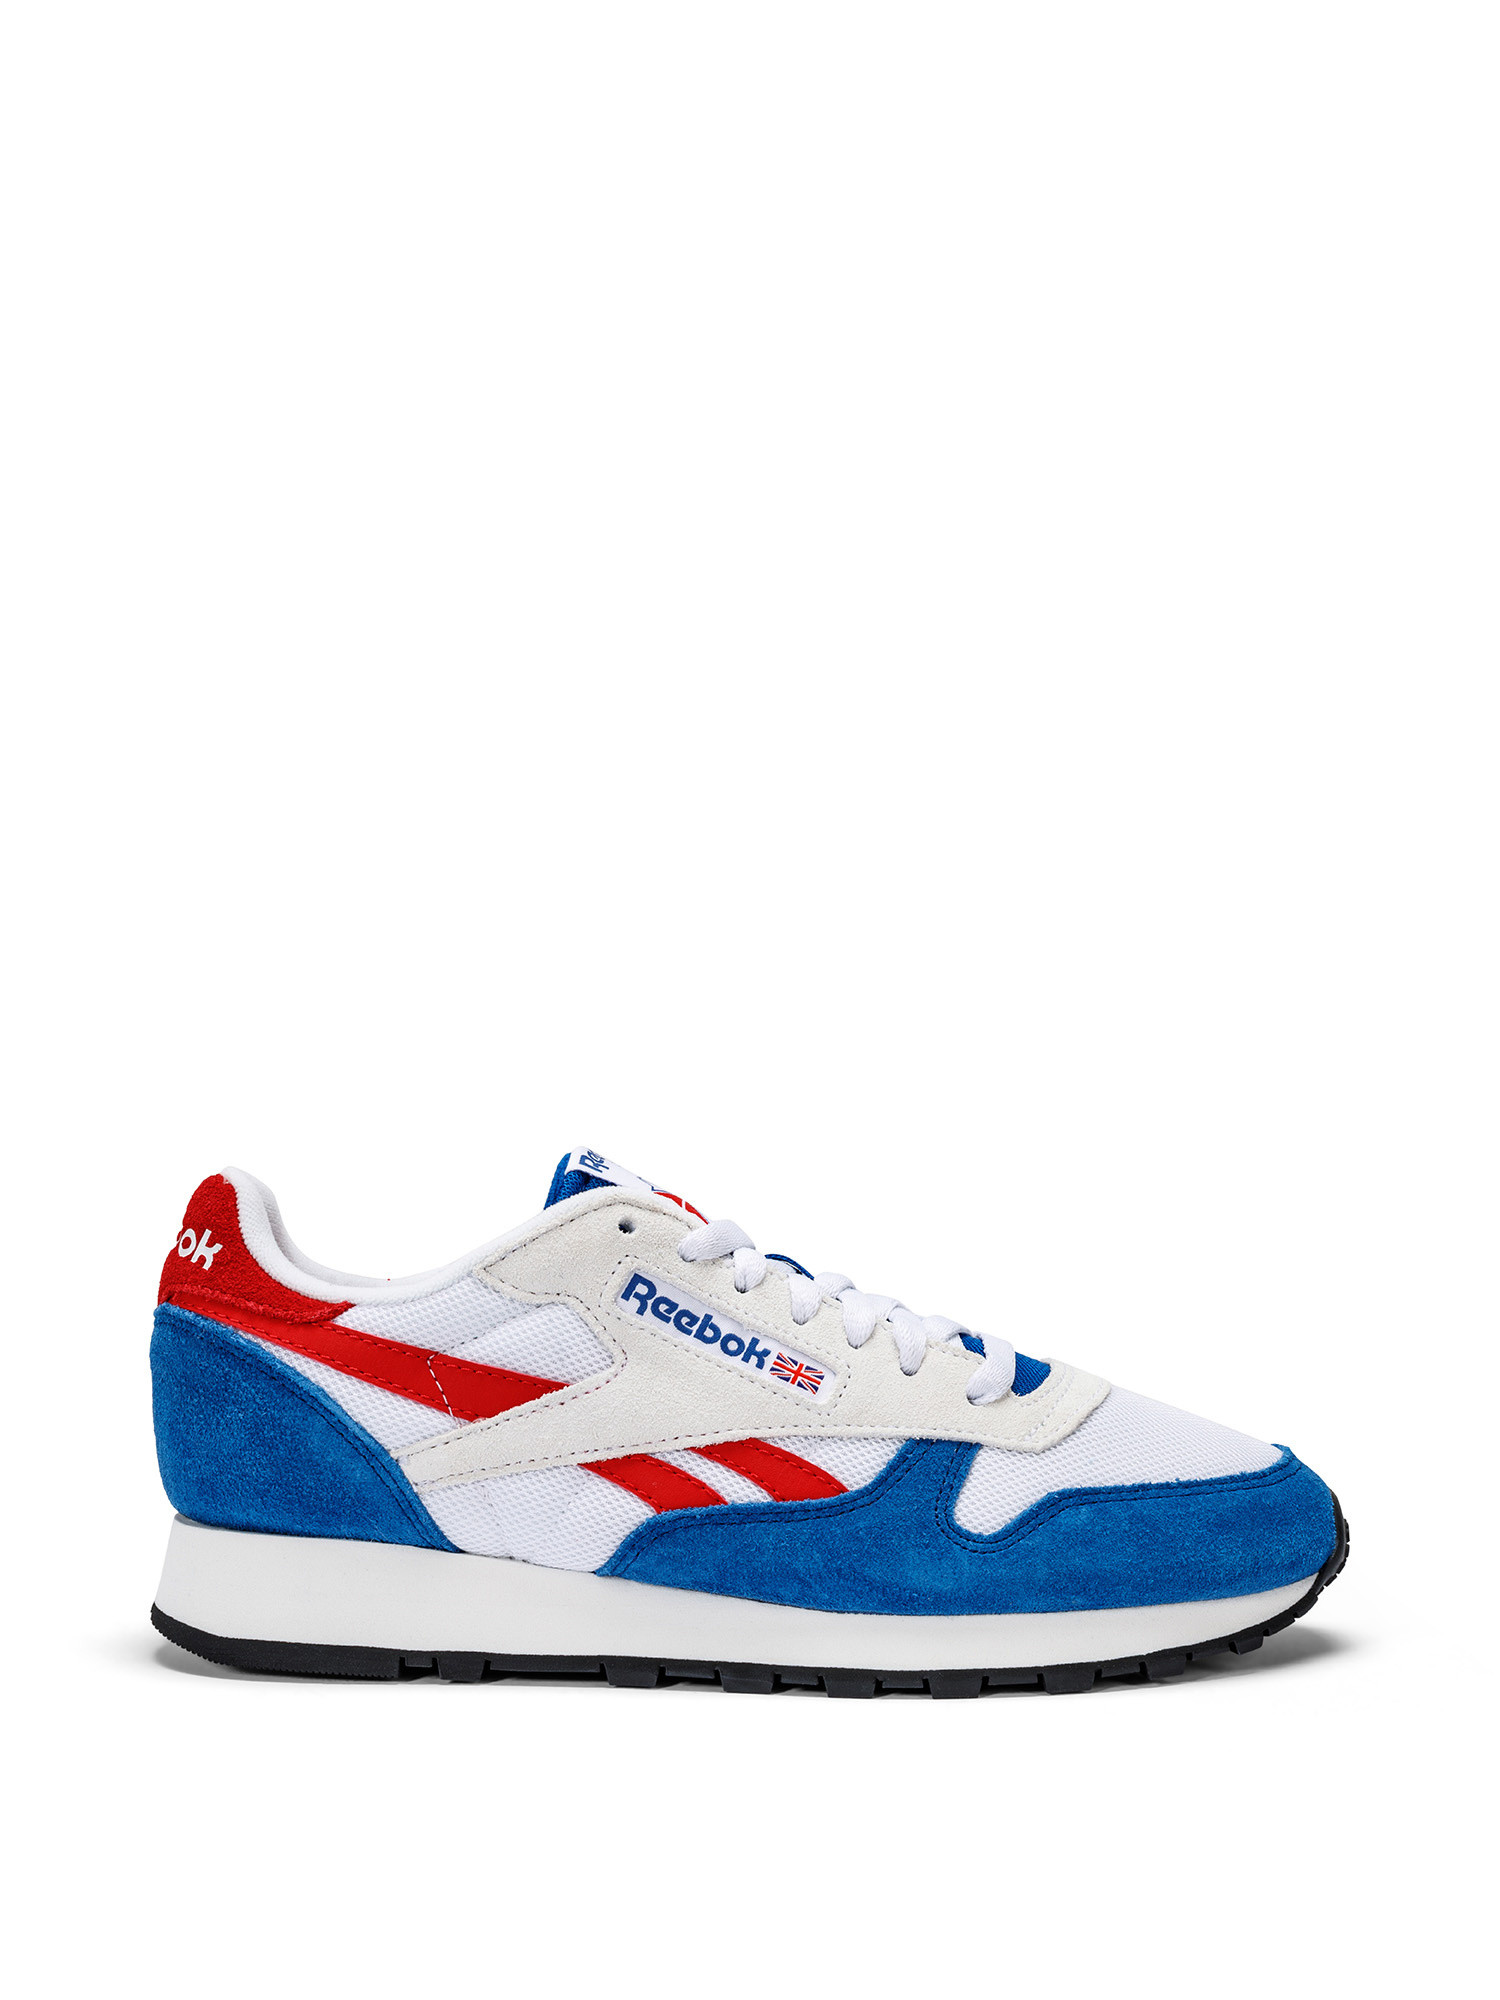 Reebok - Classic Leather Shoes Make It Yours, Blue, large image number 0